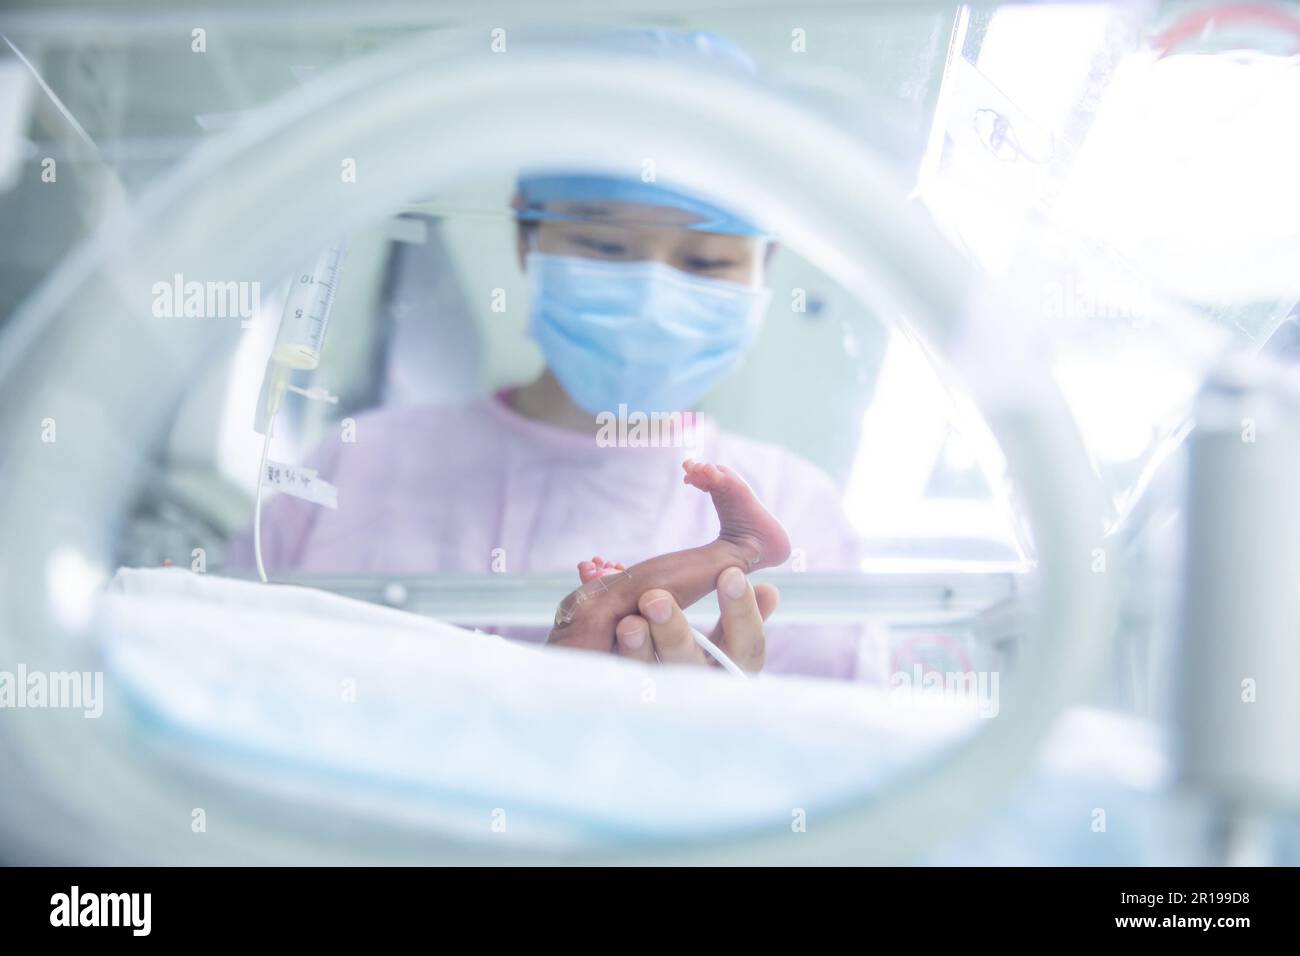 (230512) -- BEIJING, May 12, 2023 (Xinhua) -- Yang Chujia, a nurse of Neonatal Intensive Care Unit (NICU) checks the situation of a premature baby at around 11 o'clock p.m. at Peking Union Medical College Hospital (PUMCH) in Beijing, capital of China, May 9, 2023. Friday marks International Nurses Day. The number of nurses in China has experienced consistent growth over the past ten years, with an average yearly increase of 8 percent, according to the National Health Commission (NHC). The total number of registered nurses in China had exceeded 5.2 million at the end of last year, with rough Stock Photo